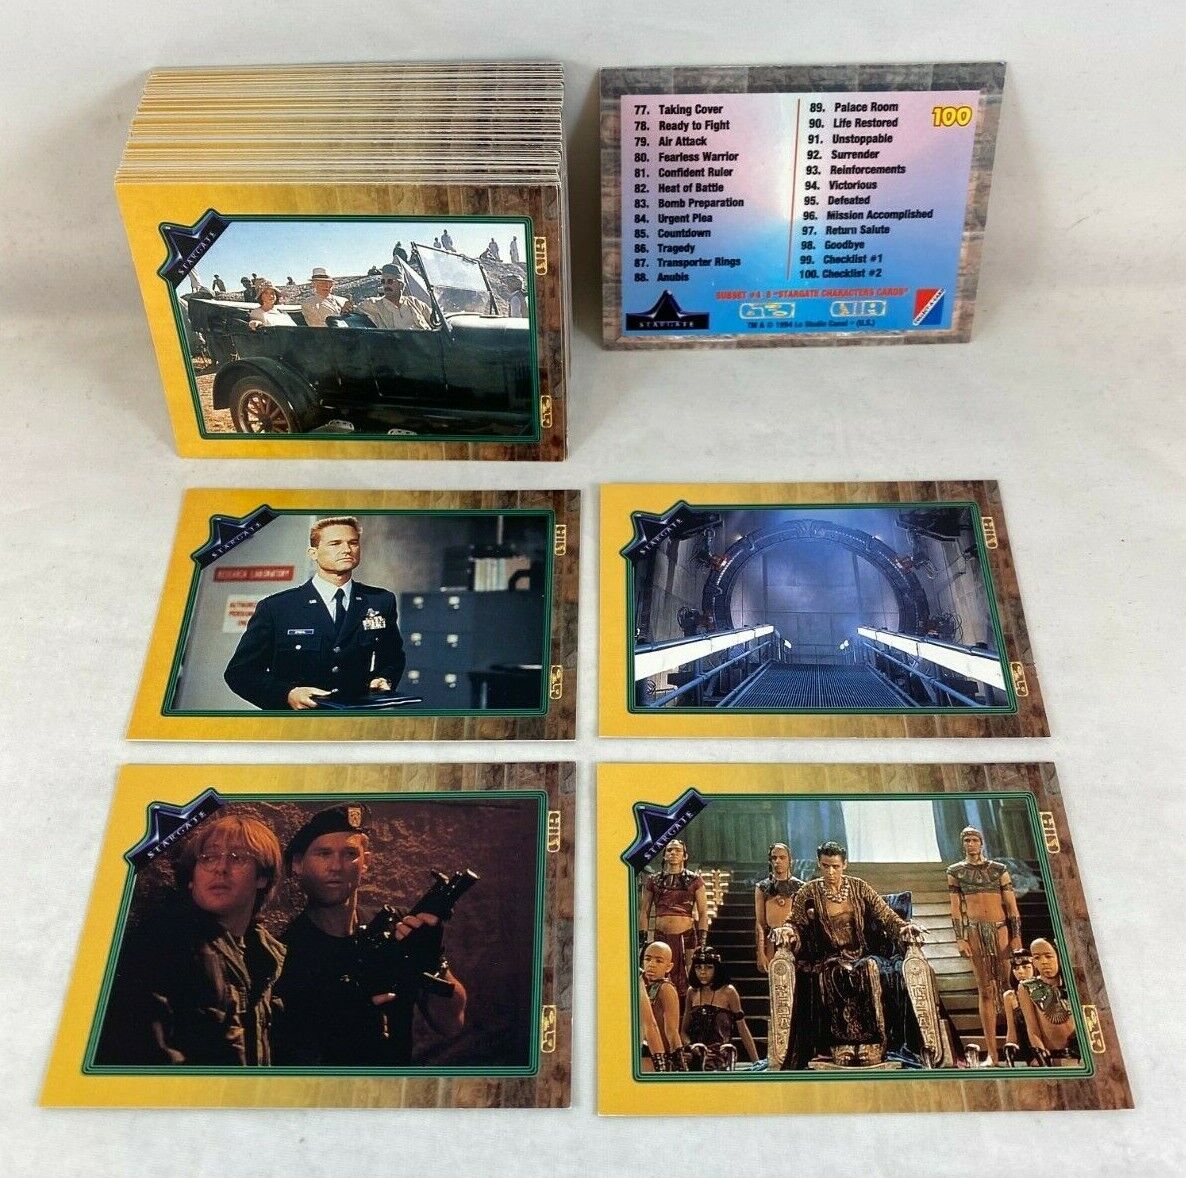 STARGATE THE MOVIE (Collect-A-Card/1994) Complete Card Set JAMES SPADER (100)